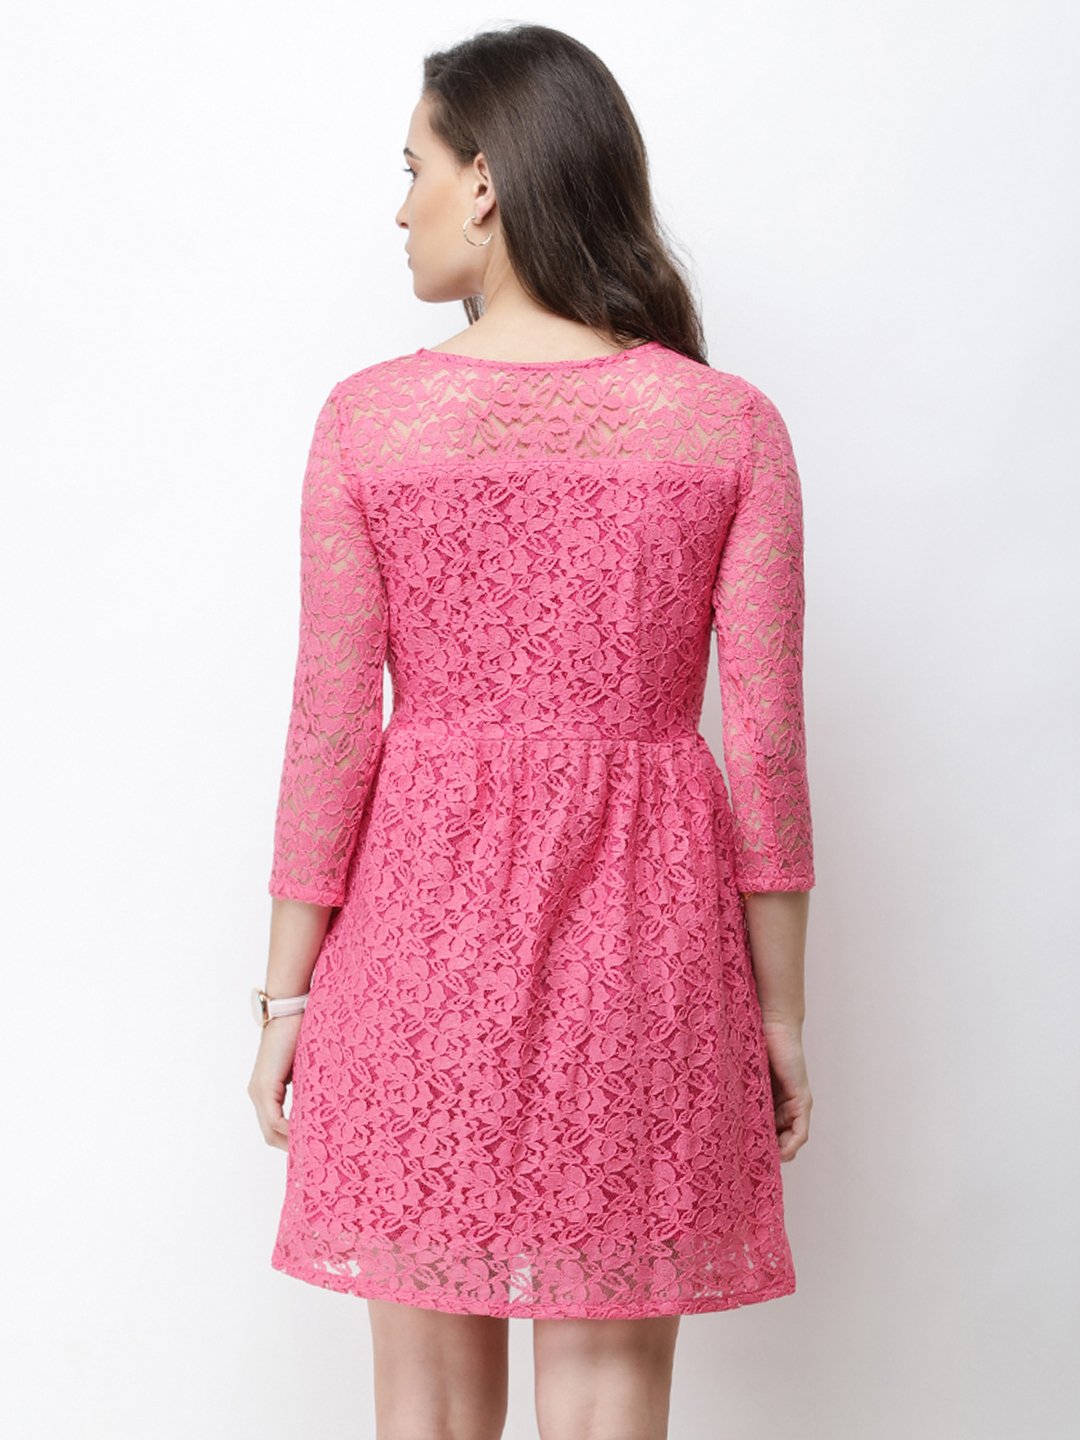 Cation Pink Lace Dress